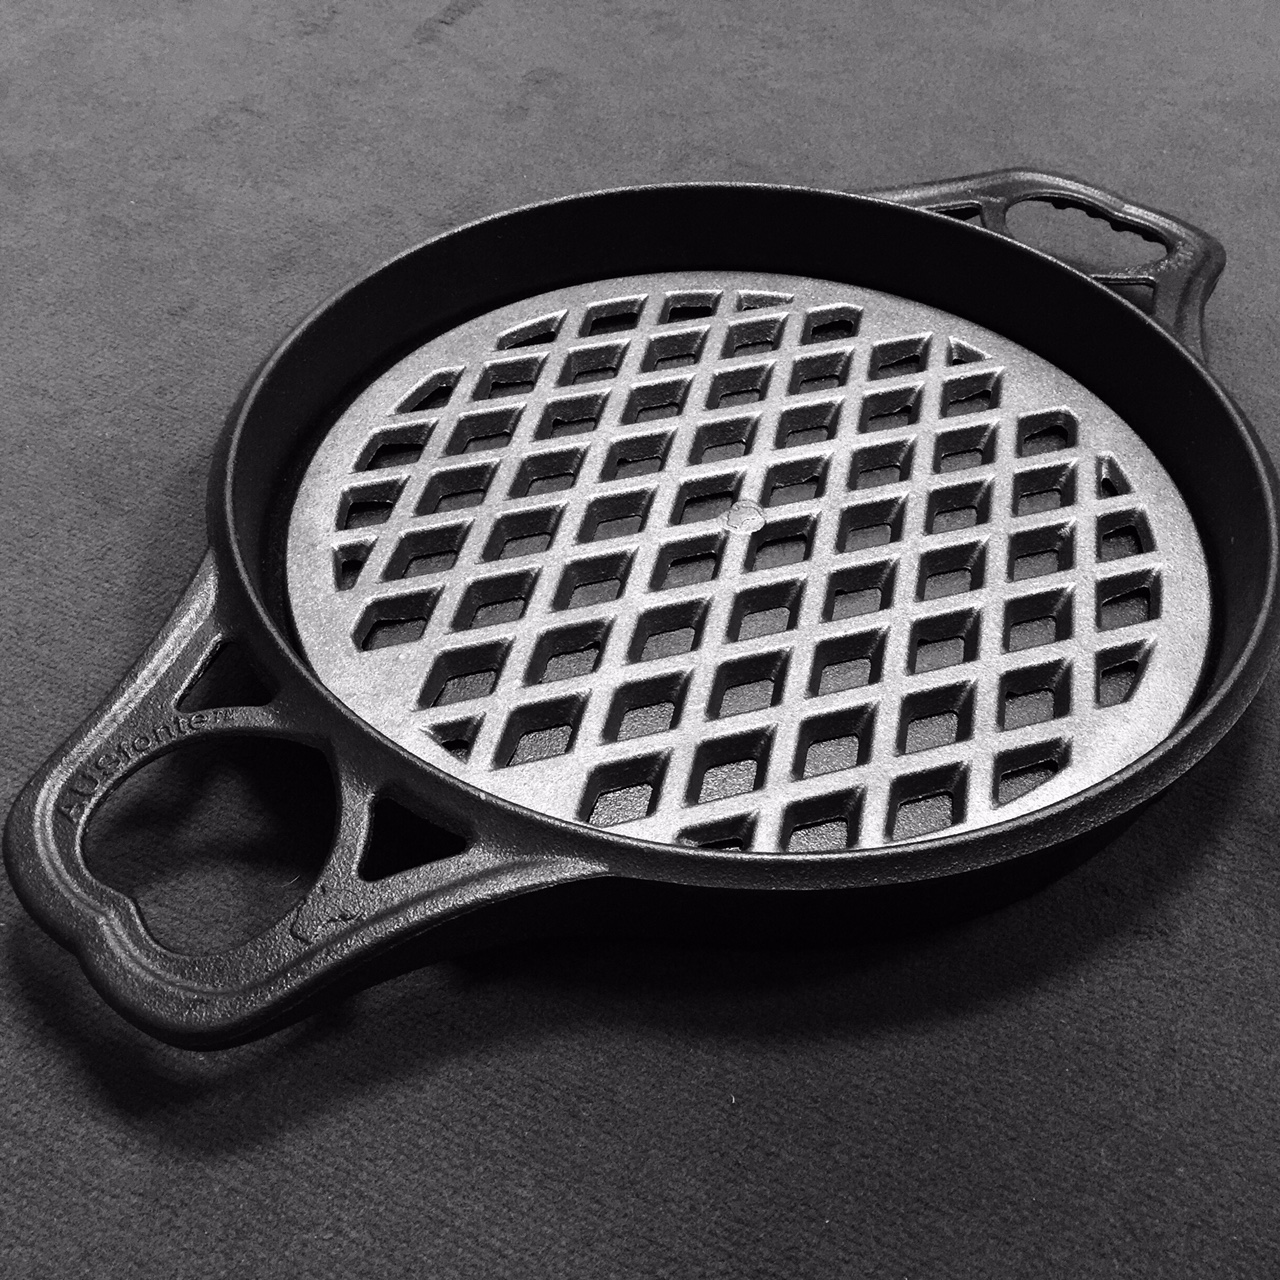 Solidtekniccs AUSfonte Pan Grill-it cast iron grilling insert Large BIGskillet 10-6-15a.jpg